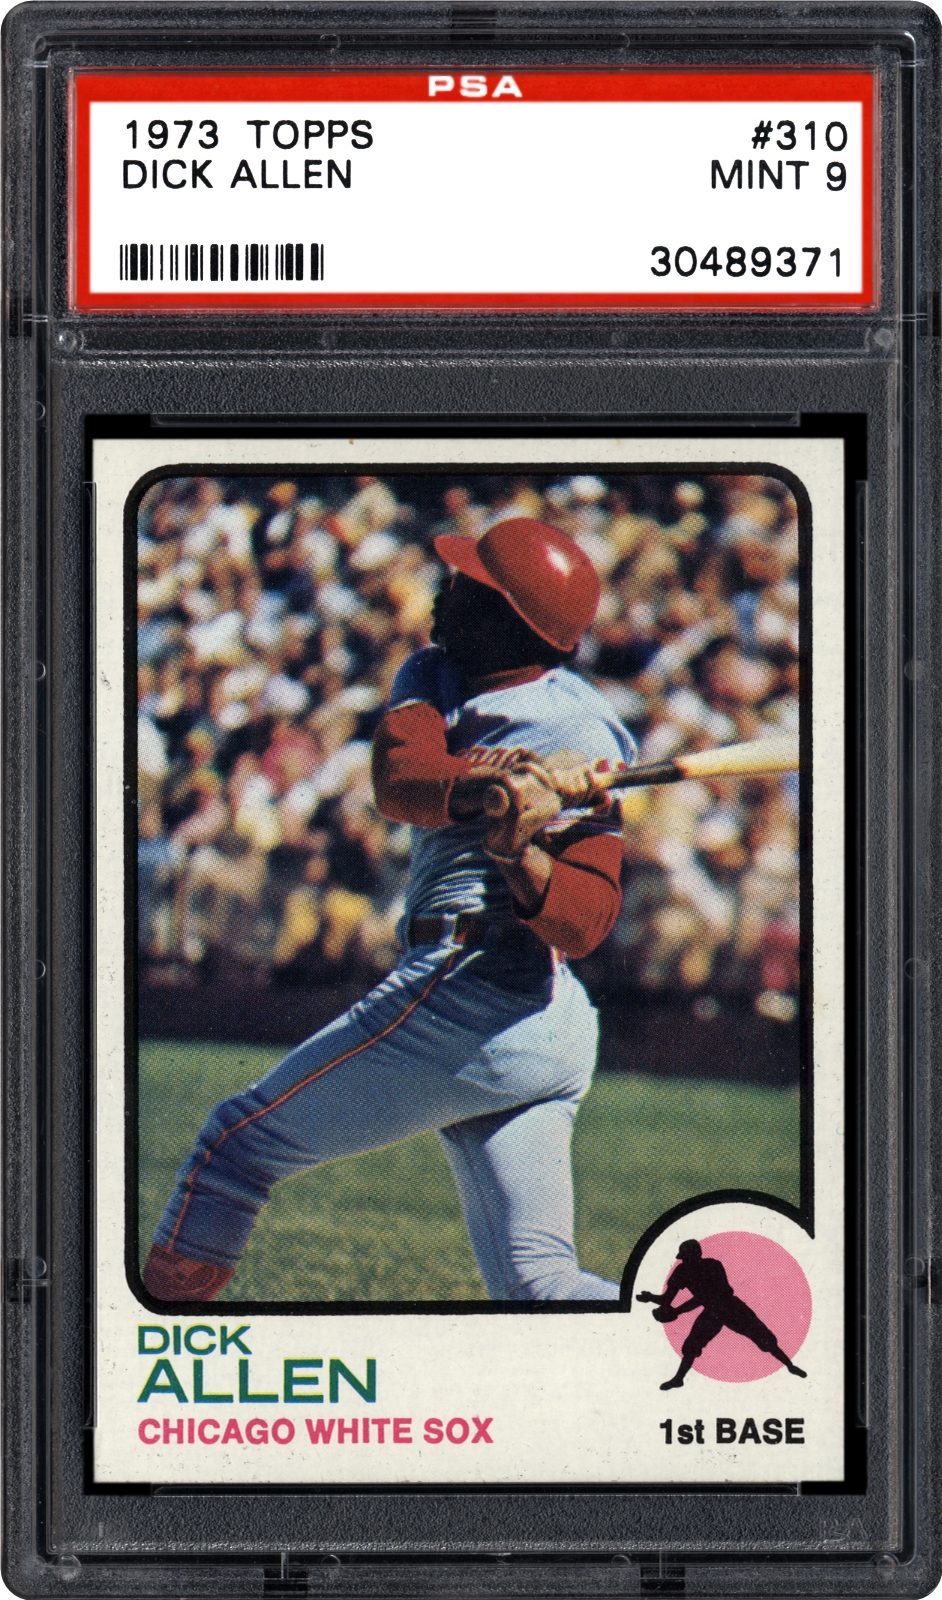 1973 Topps Dick Allen Psa Cardfacts™